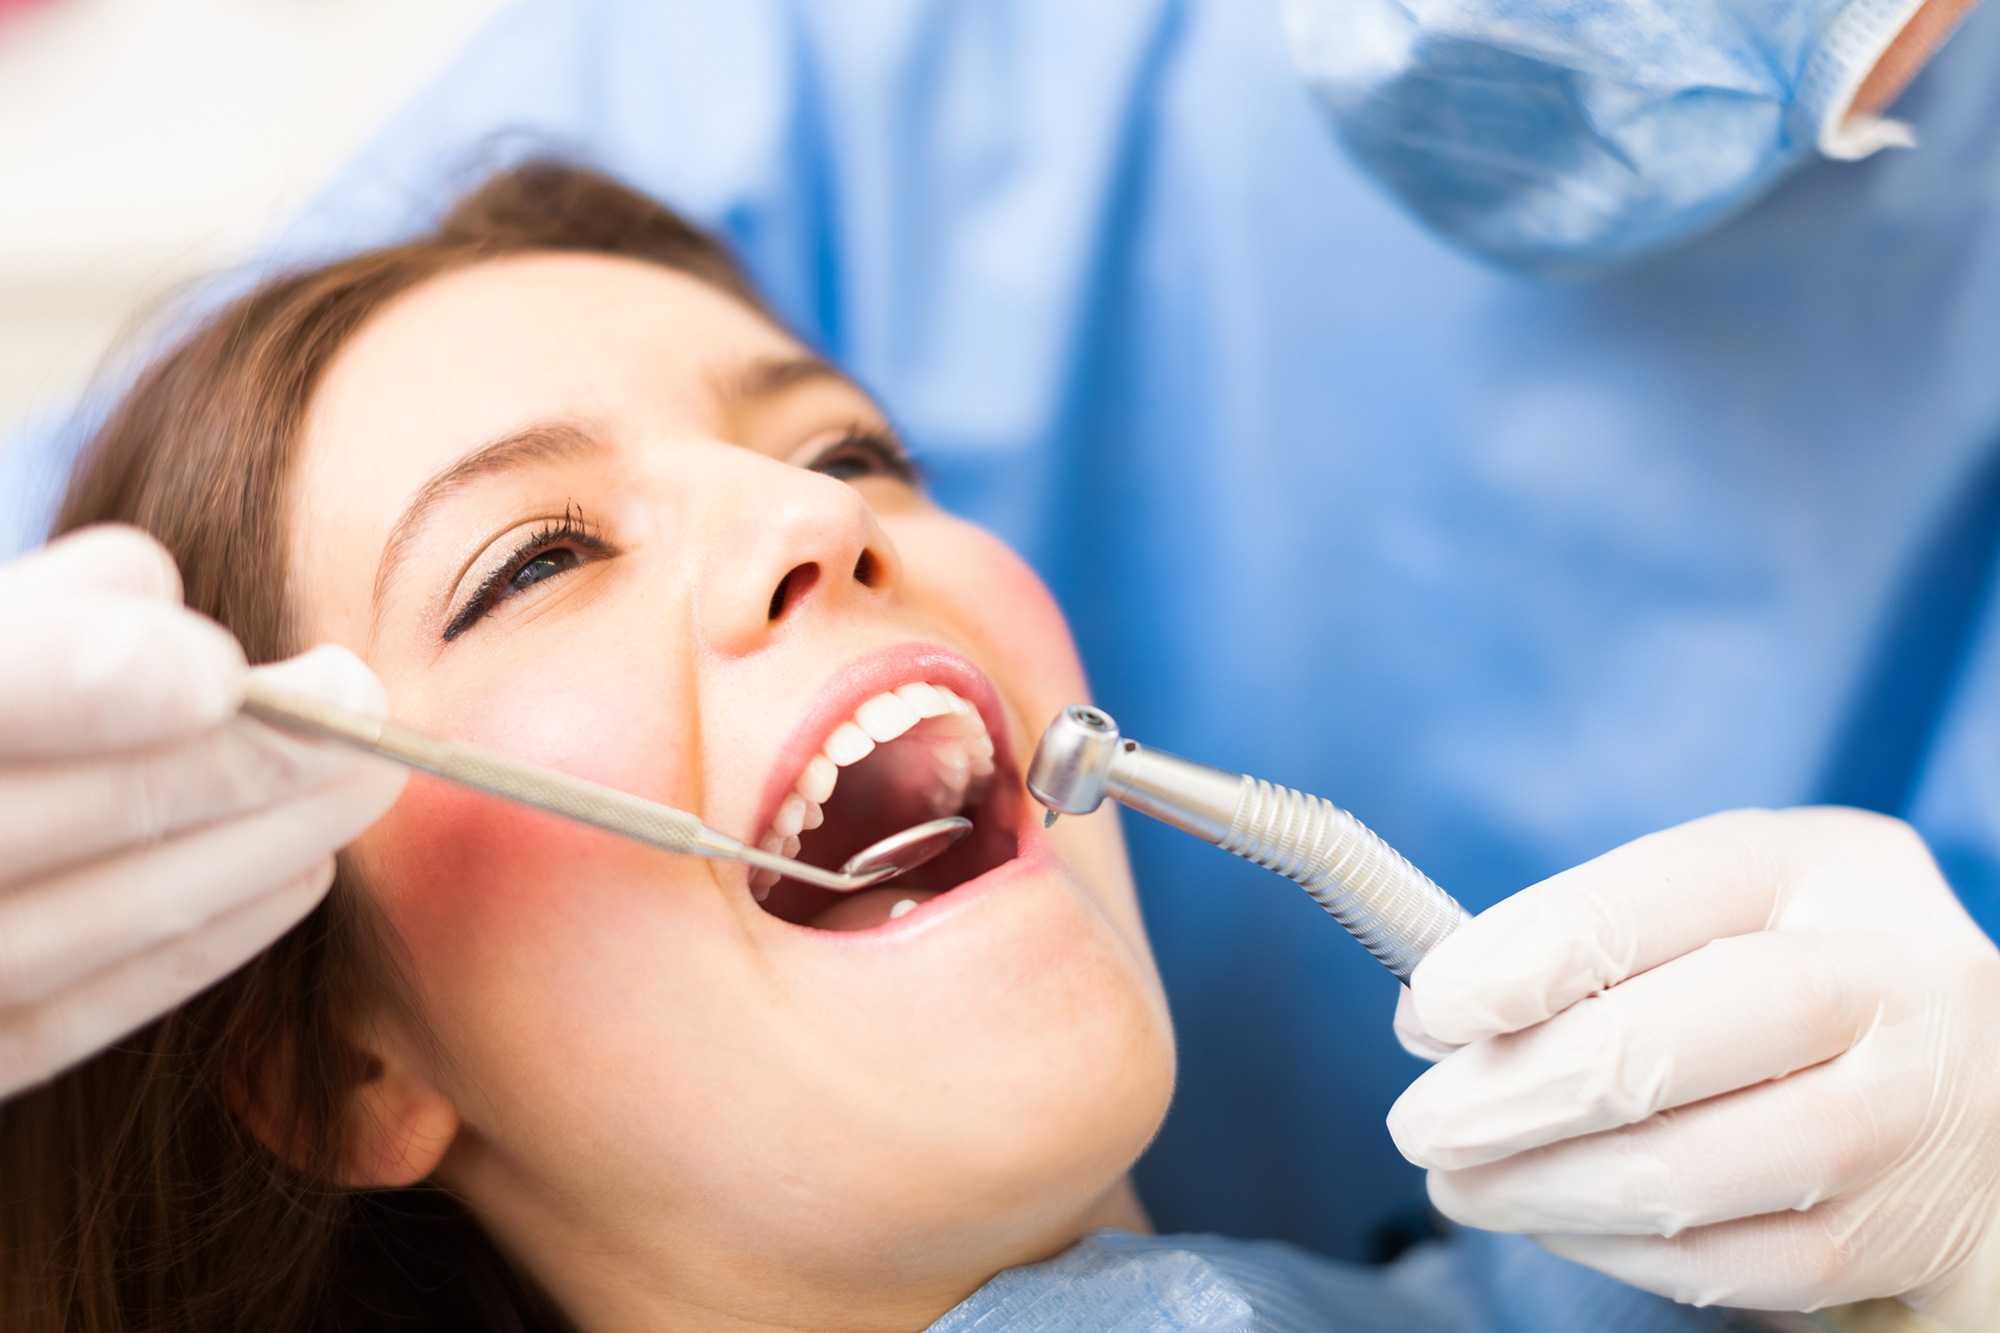 Smile Your Way to Beauty by Choosing Aesthetic Dentistry Services